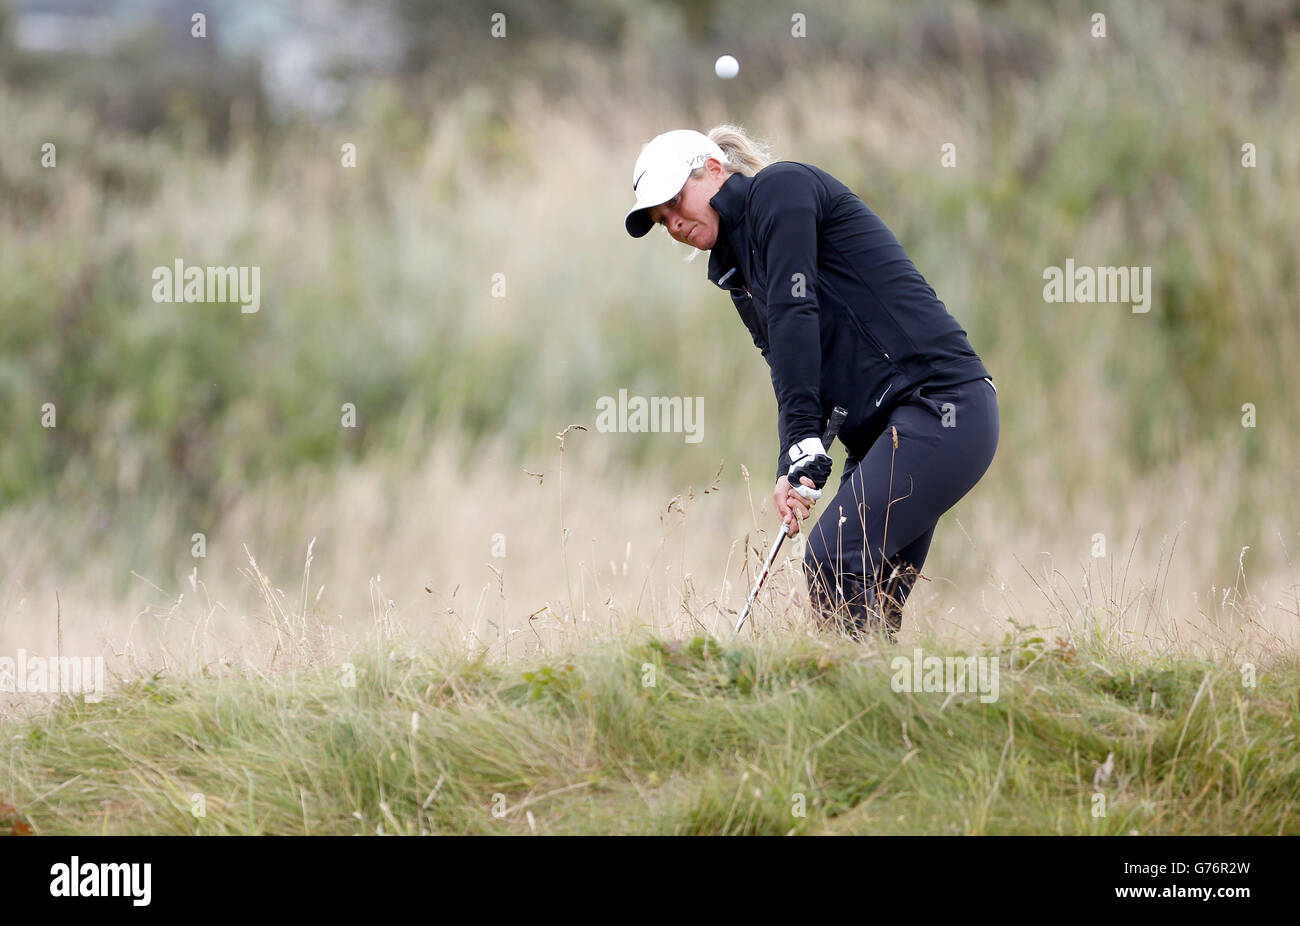 Suzann Pettersen of Norway, plays out of the rough on the 1st hole during day four of the Ricoh Women's British Open at Royal Birkdale, Southport. Stock Photo